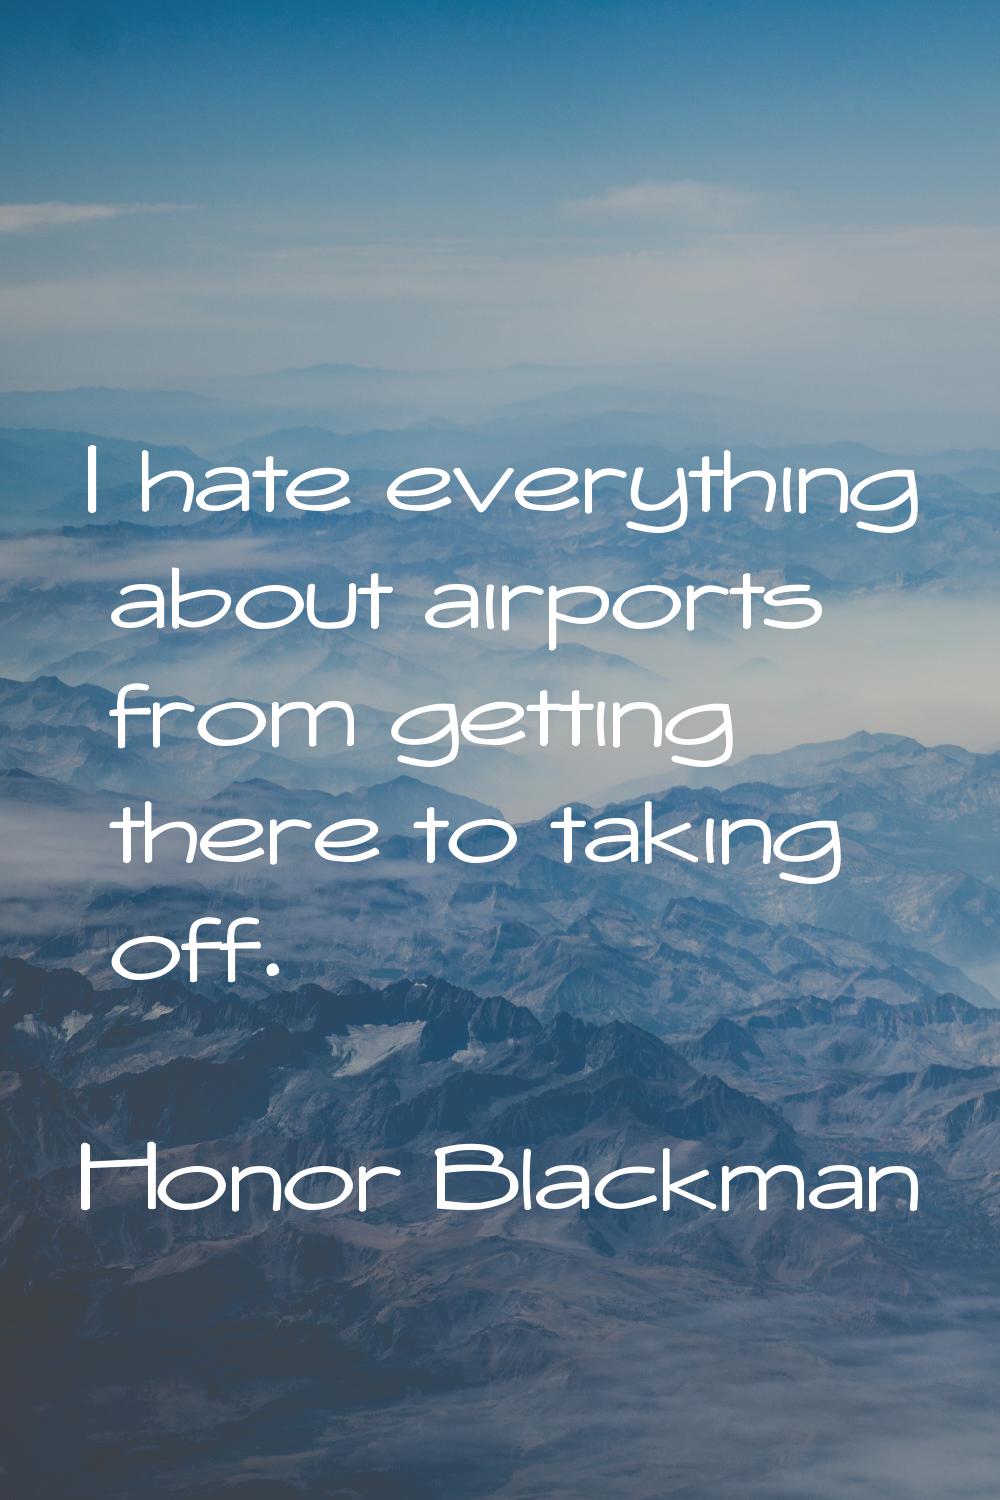 I hate everything about airports from getting there to taking off.